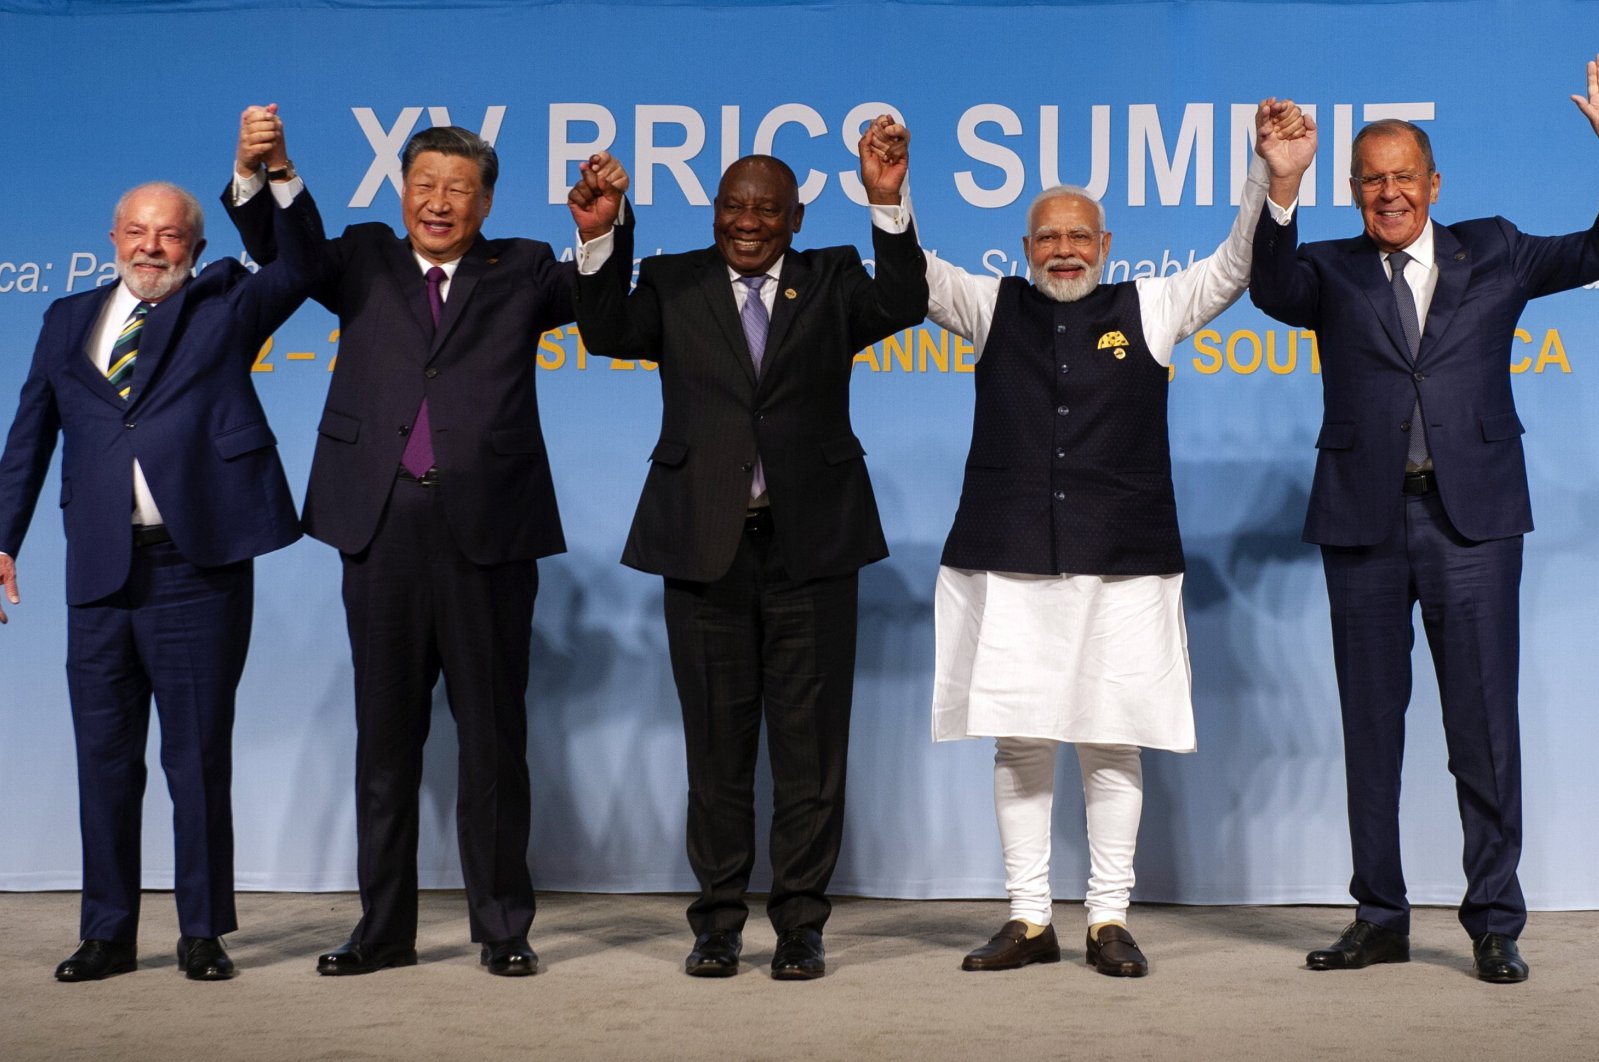 (From L to R) Brazil&#039;s President Luiz Inacio Lula da Silva, China&#039;s President Xi Jinping, South African President Cyril Ramaphosa, Indian Prime Minister Narendra Modi and Russia&#039;s Foreign Minister Sergei Lavrov pose for a picture at the BRICS Summit in Johannesburg, South Africa, Aug. 23, 2023. (EPA Photo)